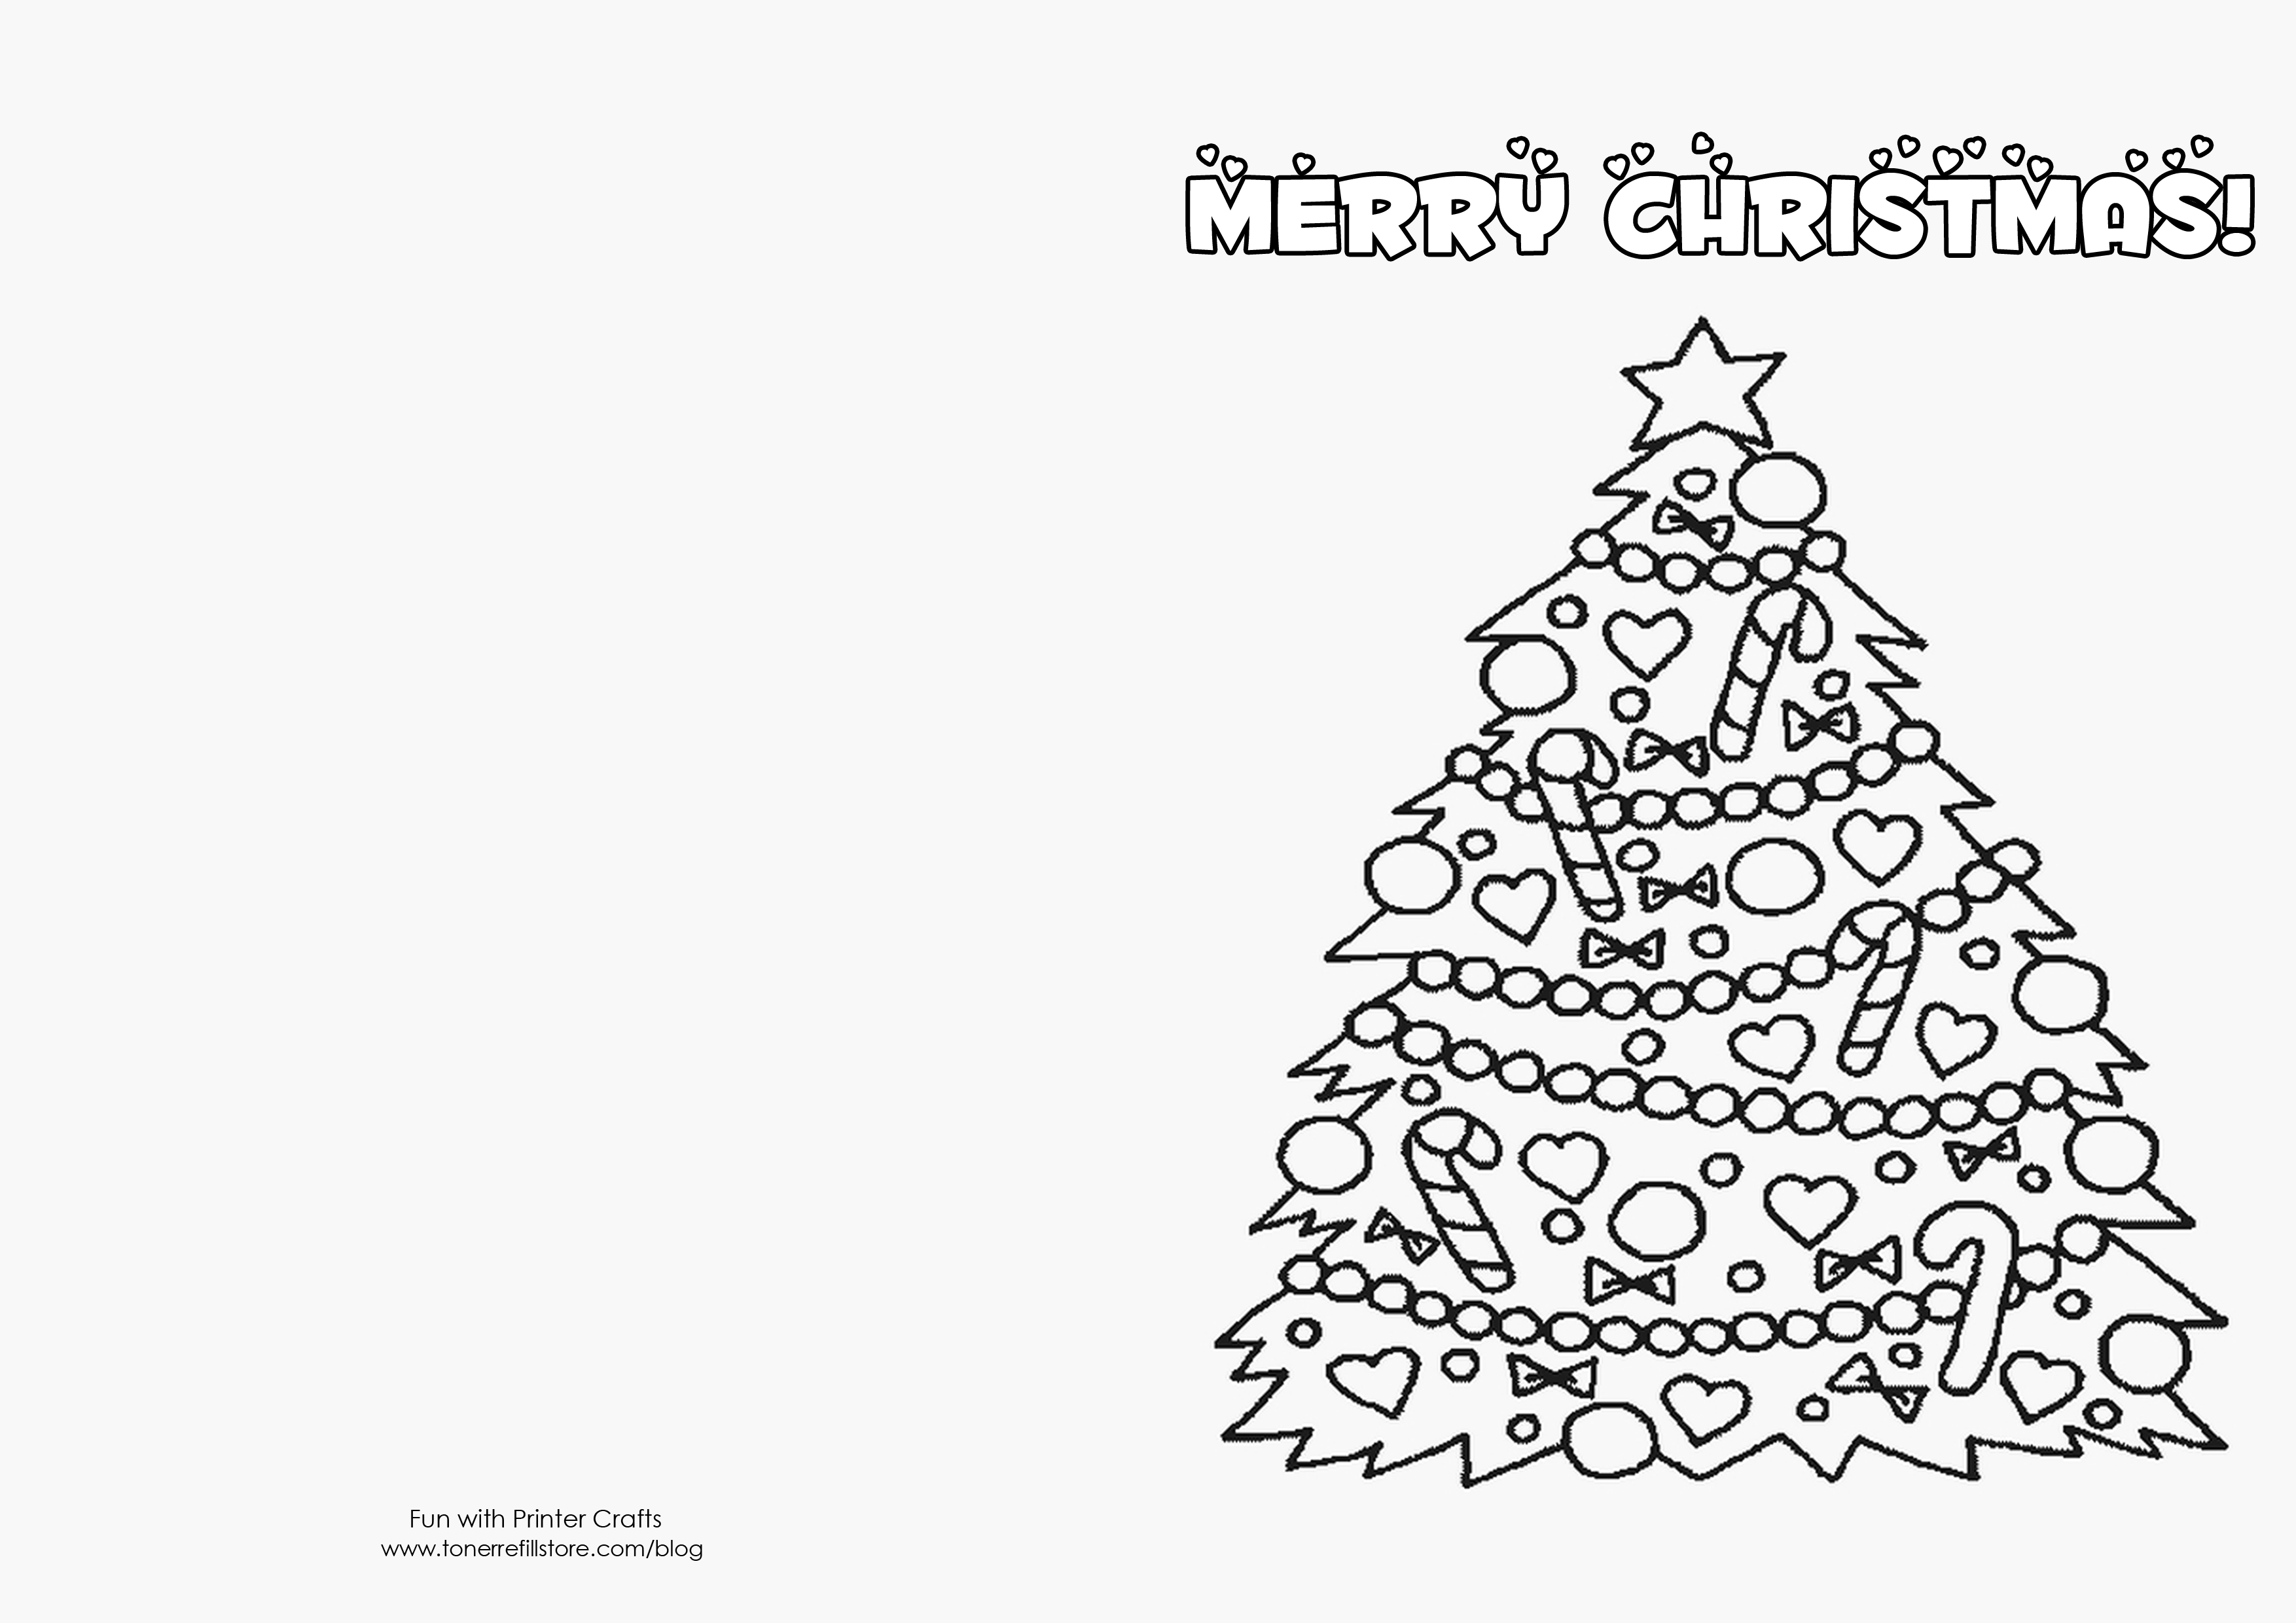 How To Make Printable Christmas Cards For Kids To Color - Fun with ...